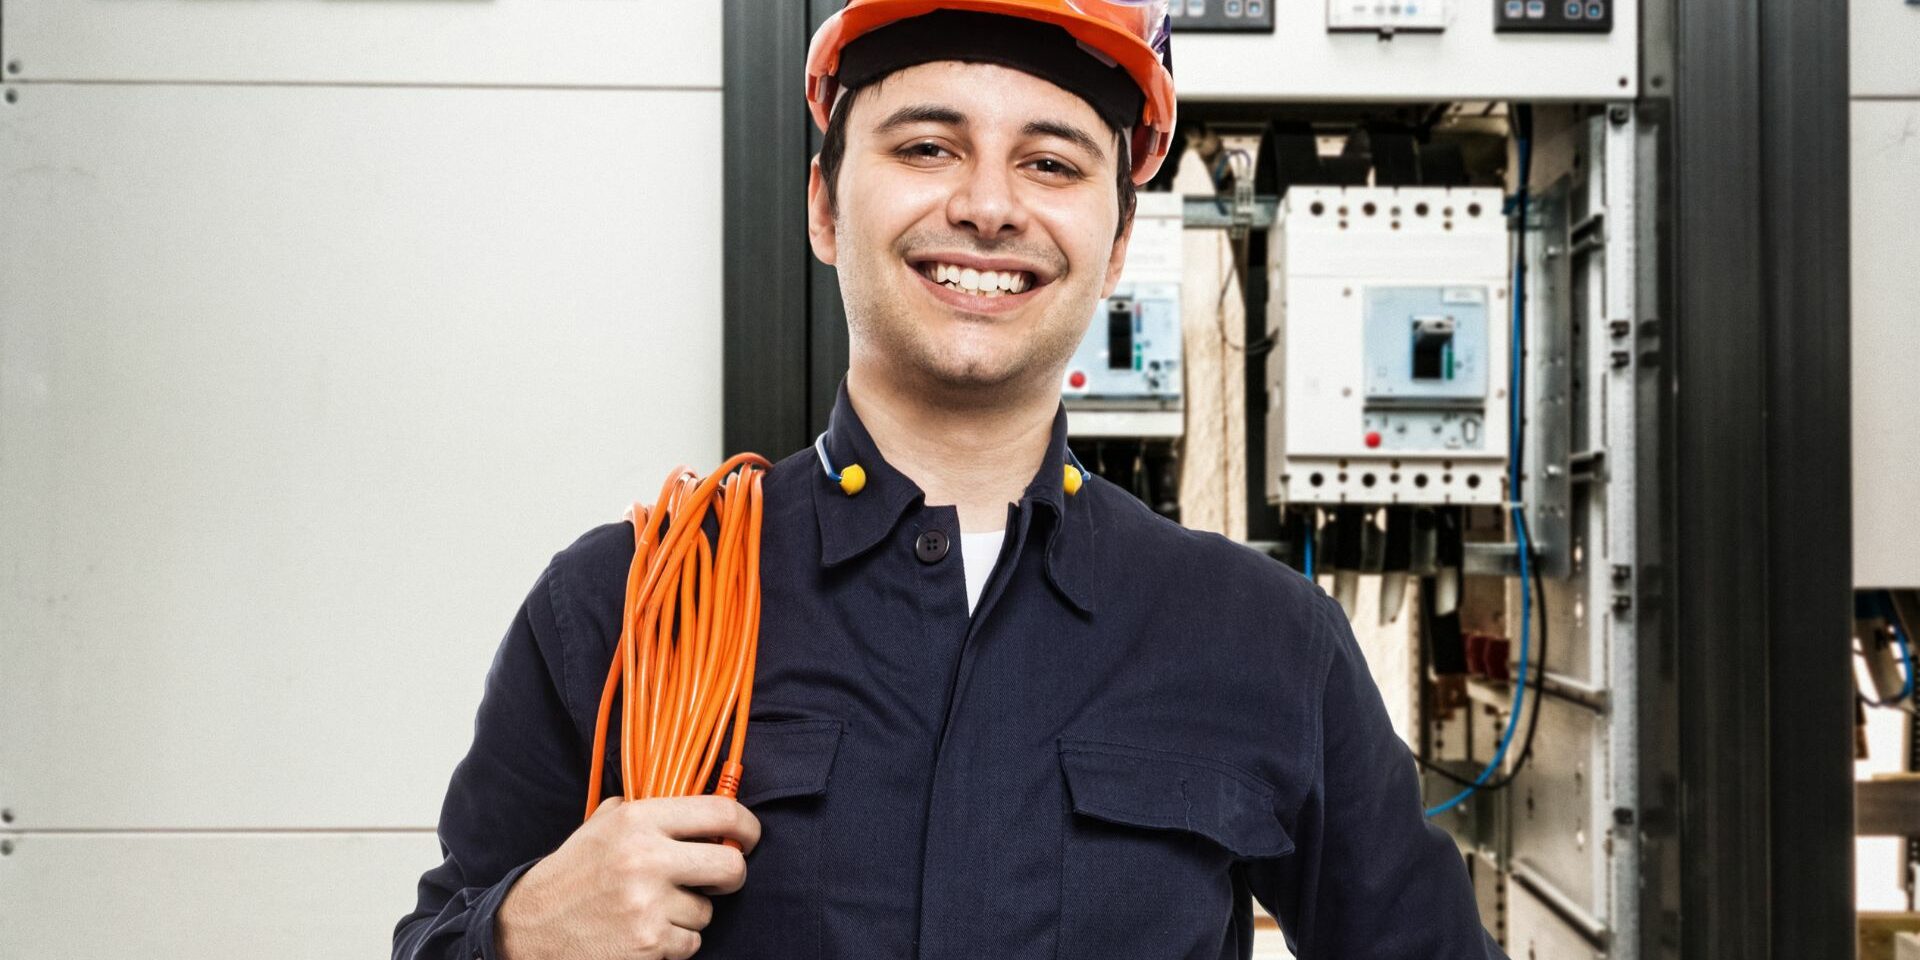 Male in a hard hat smiling with extension cord over his shoulder.